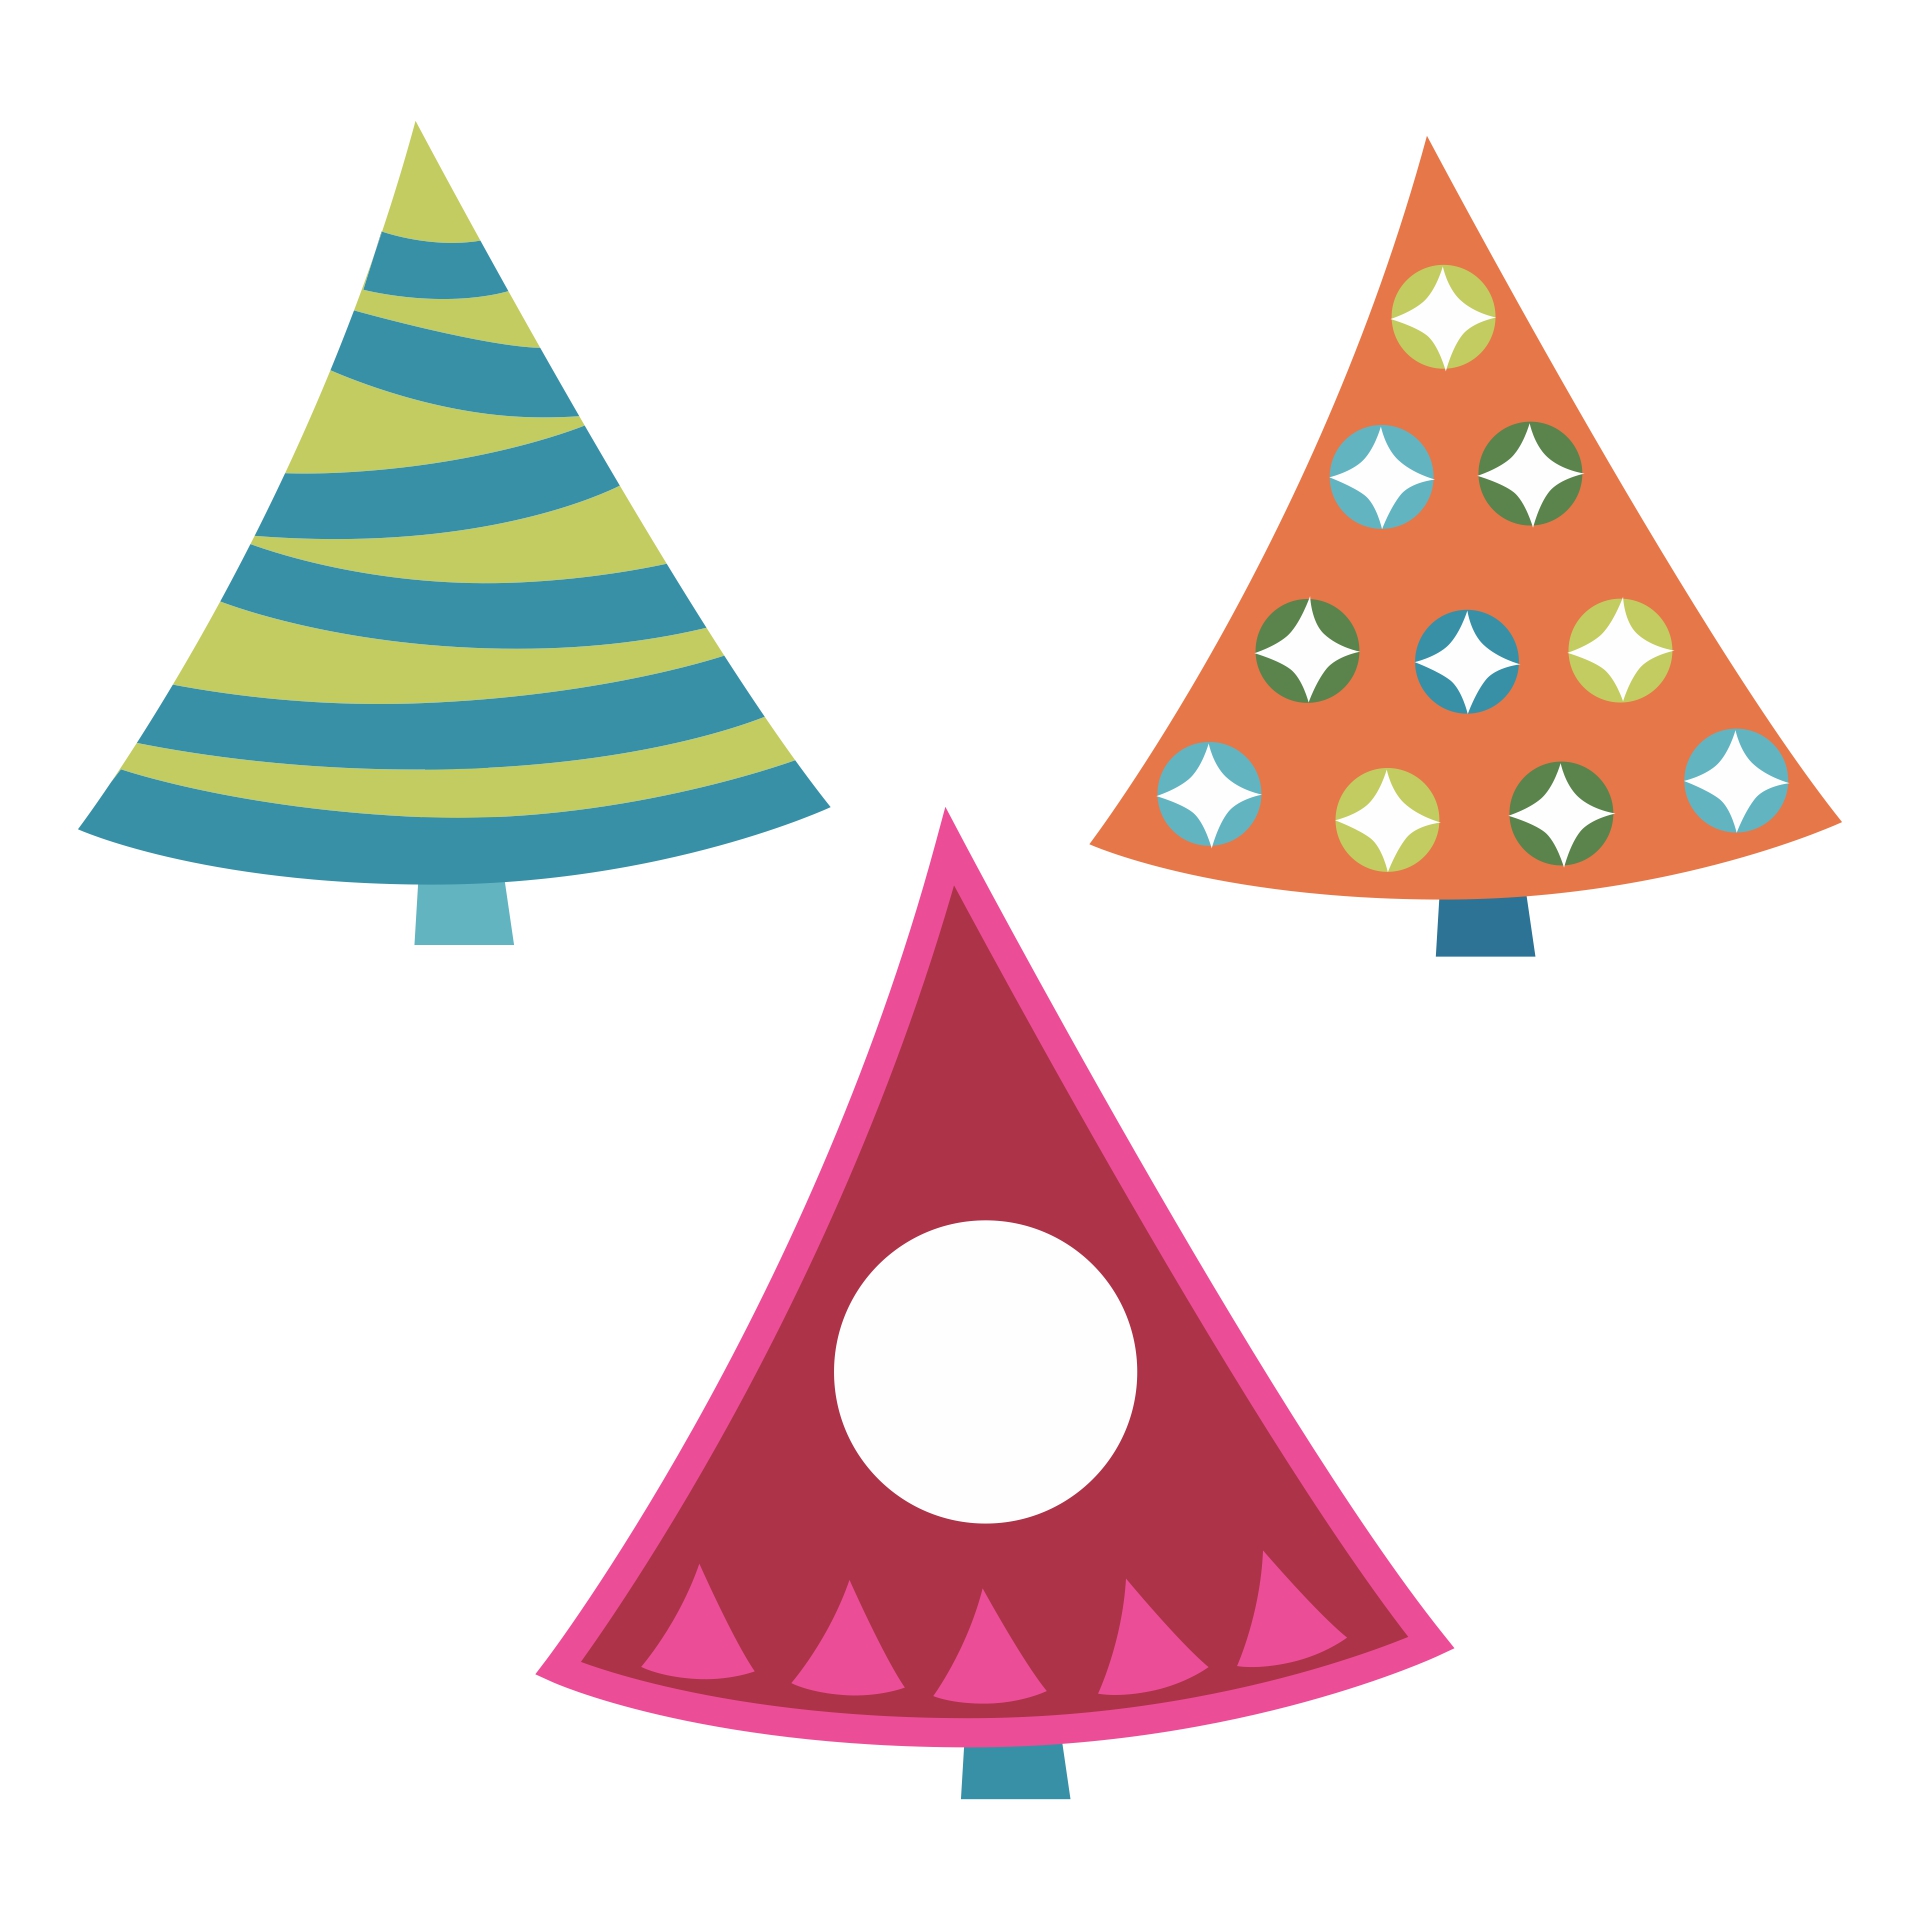 5 Best Images Of Printable 3D Paper Christmas Trees Printable Paper 